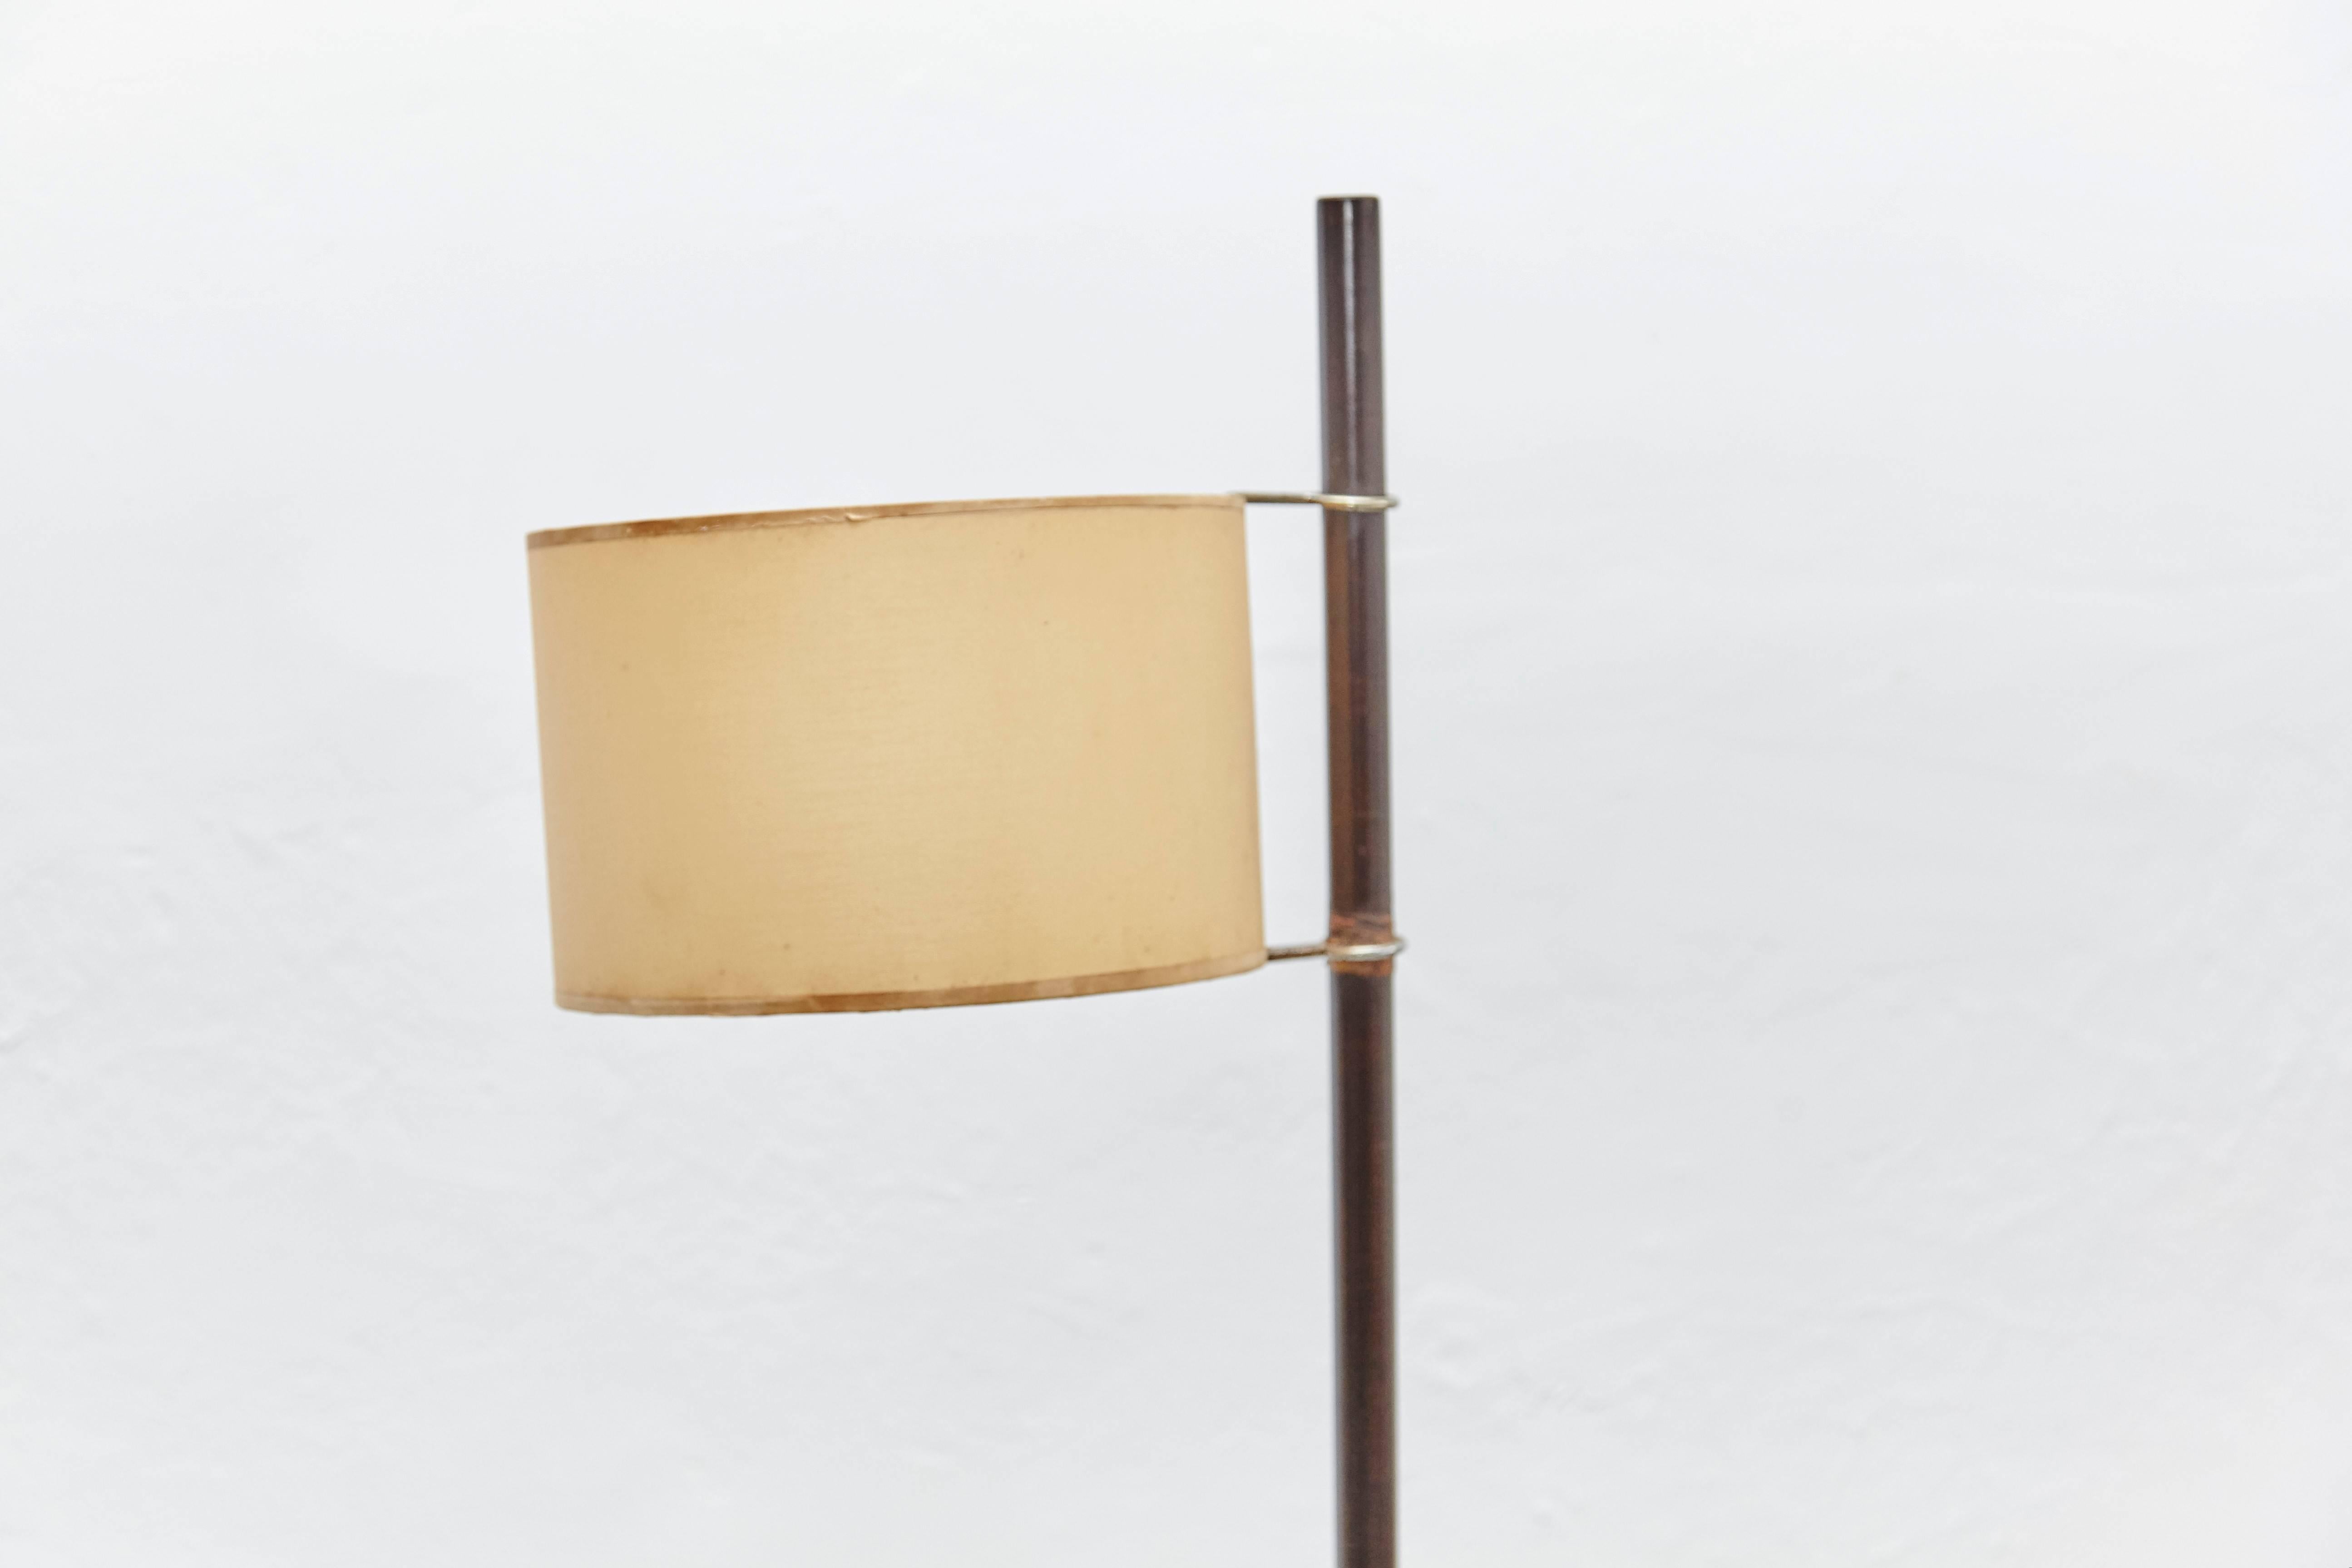 Floor lamp designed by Miguel Milá, circa 1961.
Manufactured by Tramo (Spain), circa 1961.

In good original condition, with minor wear consistent with age and use, preserving a beautiful patina.

Miguel Milá represents like no other person